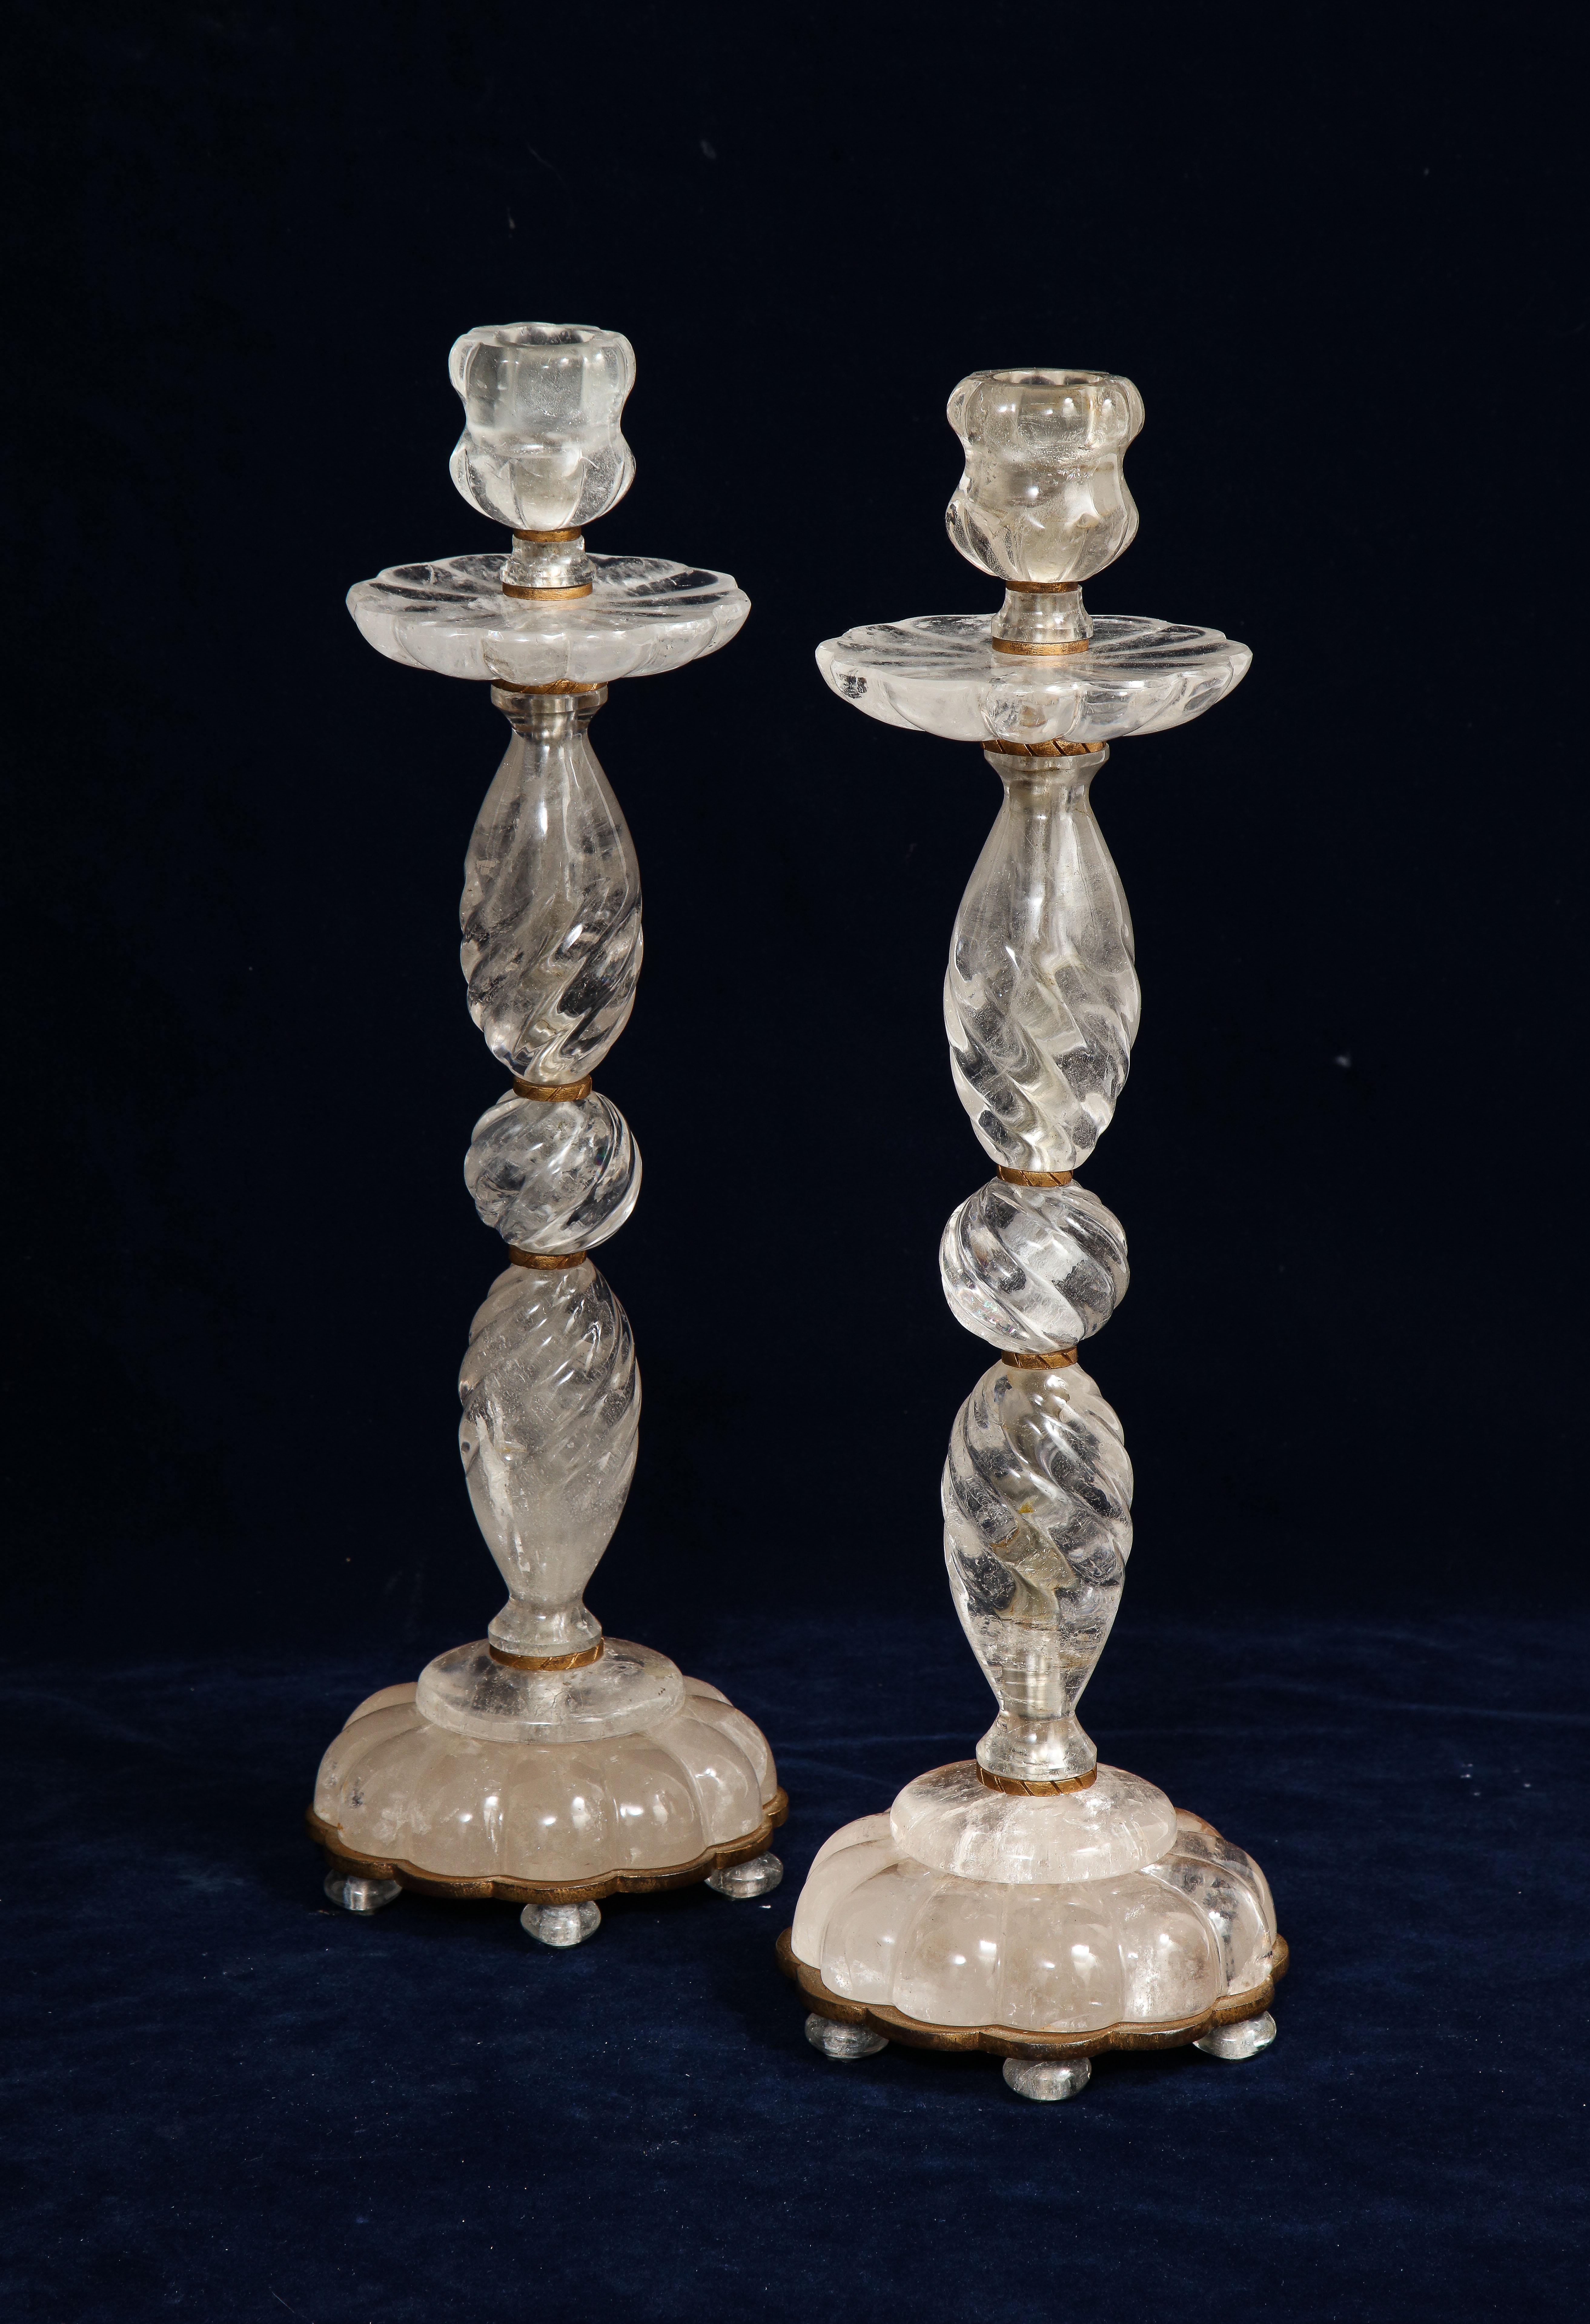 An Impressive Pair of French Louis XVI style mid-century hand-carved and hand-polished rock crystal candlesticks on patinated bronze mounts. Each candlestick is beautiful with multiple sections of fluted, convex, and concave hand-carved and